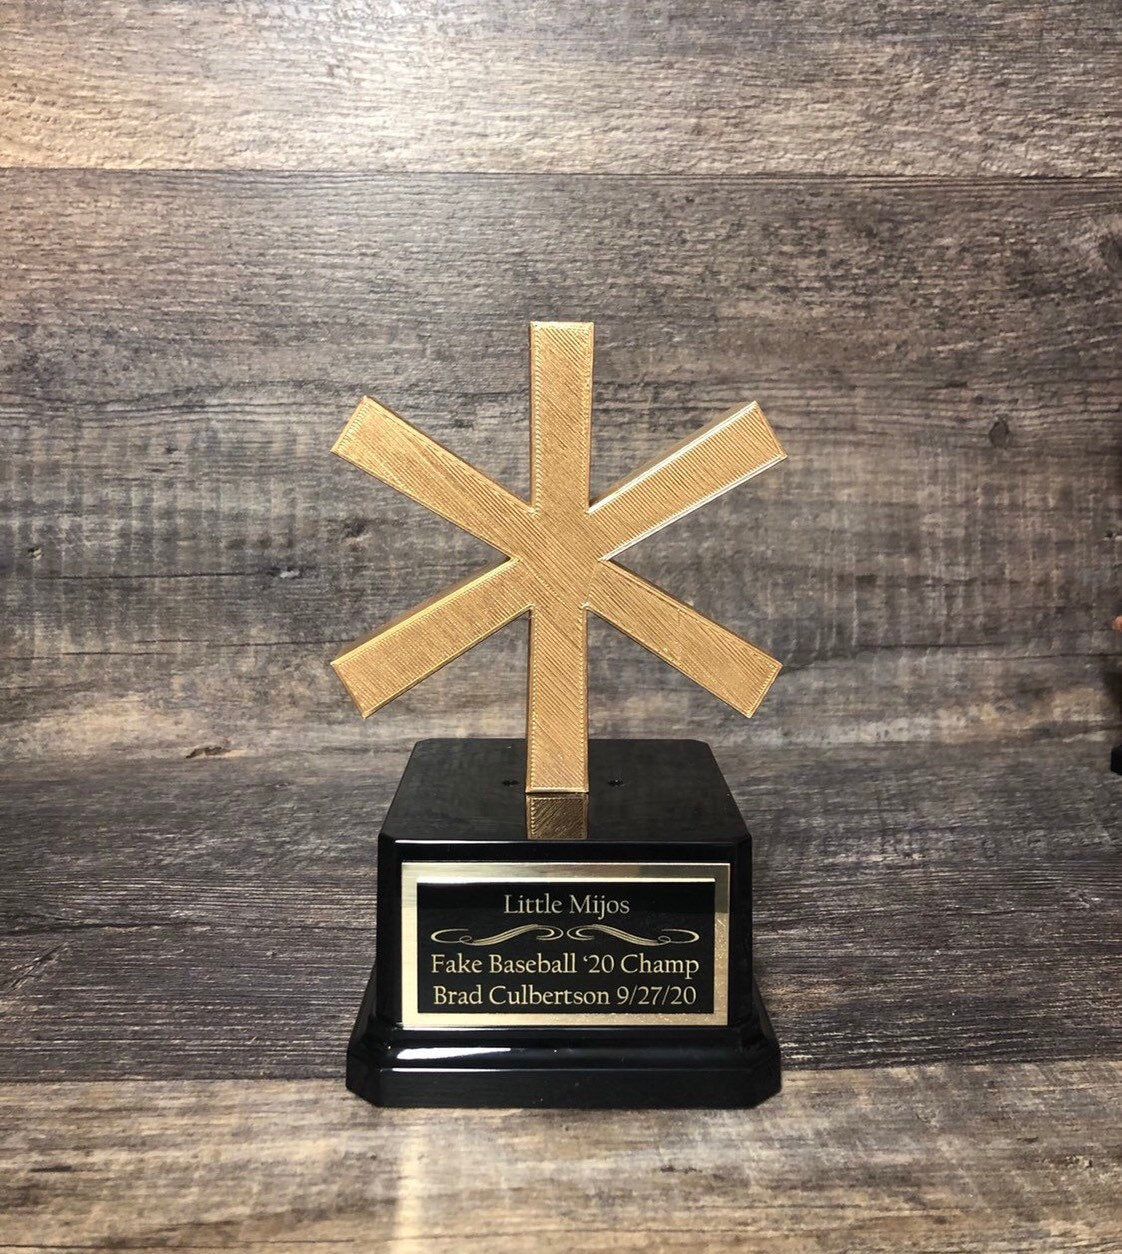 Funny Asterisk Trophy For A Crazy Year Unique Fantasy Sports Trophy Award Bracket Champion Championship Team Award Personalized